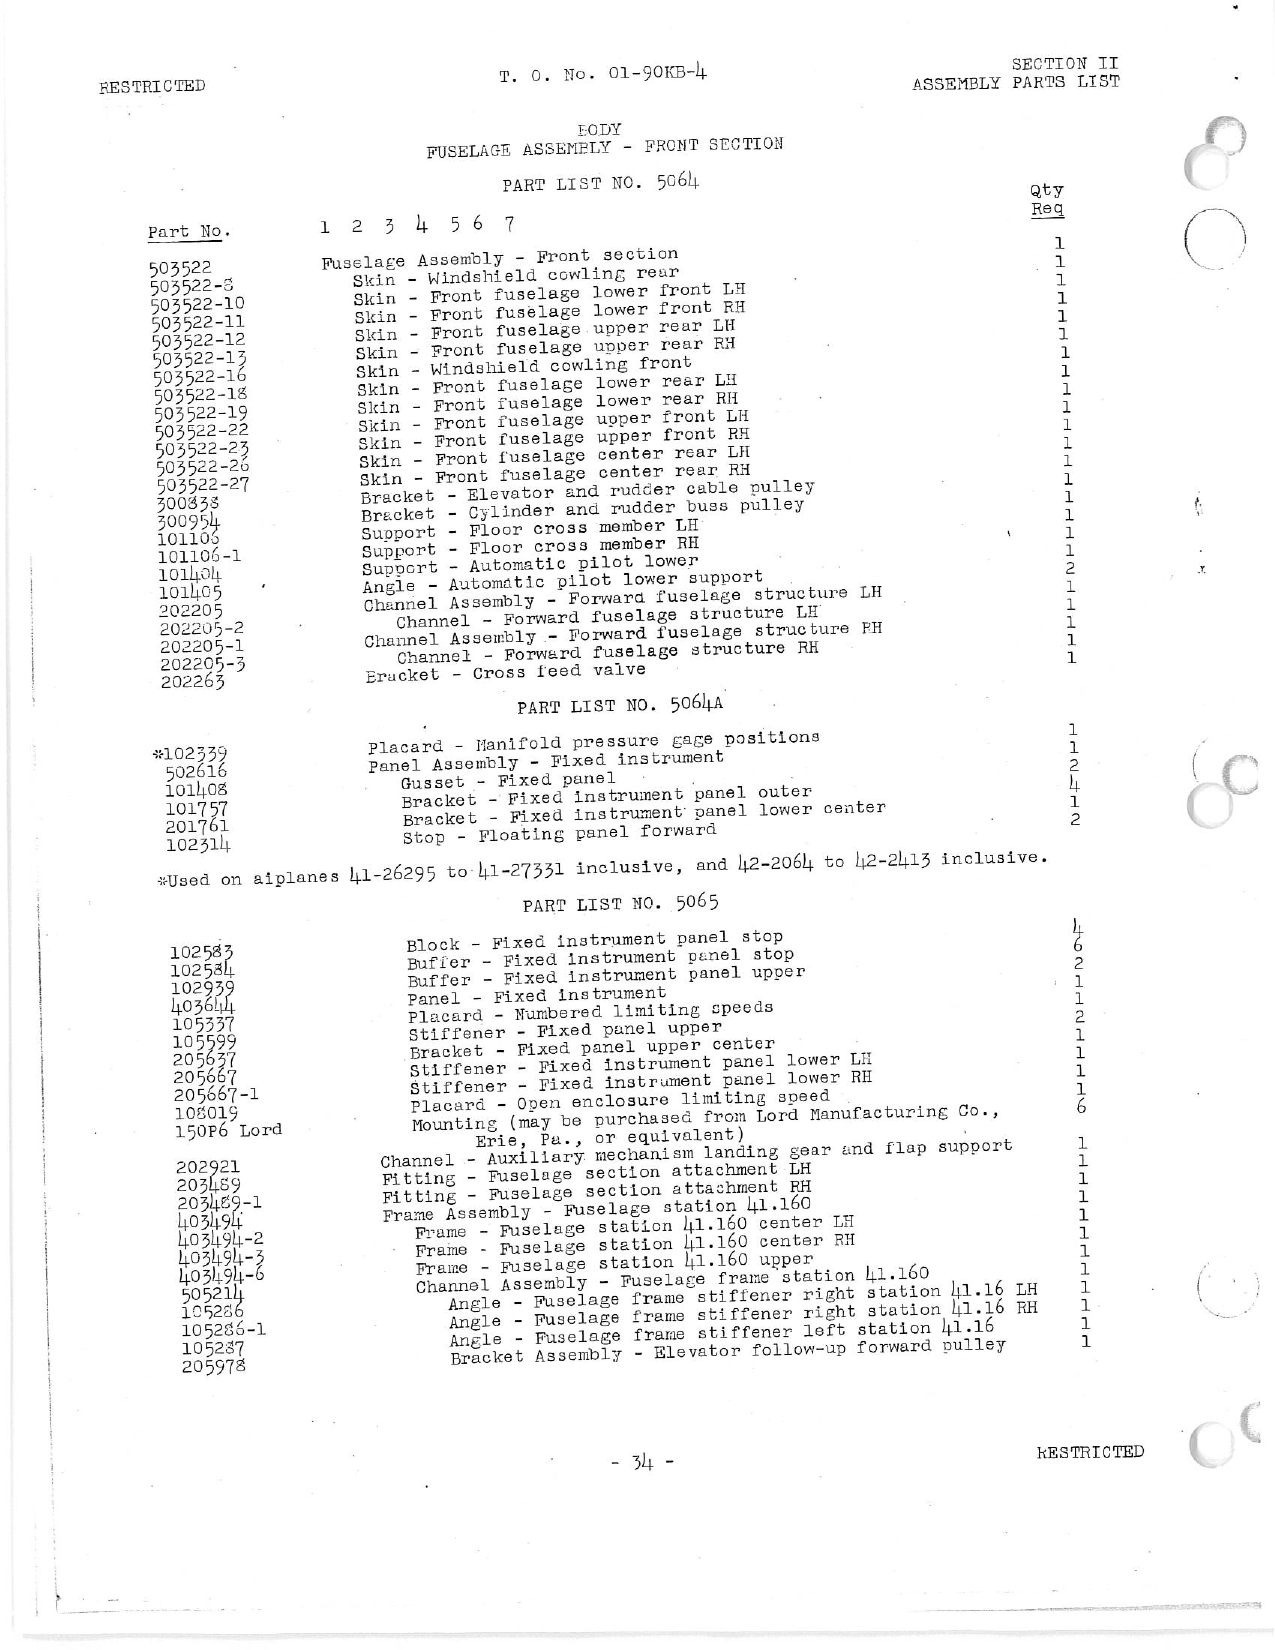 Sample page 37 from AirCorps Library document: Parts Catalog: AT-10